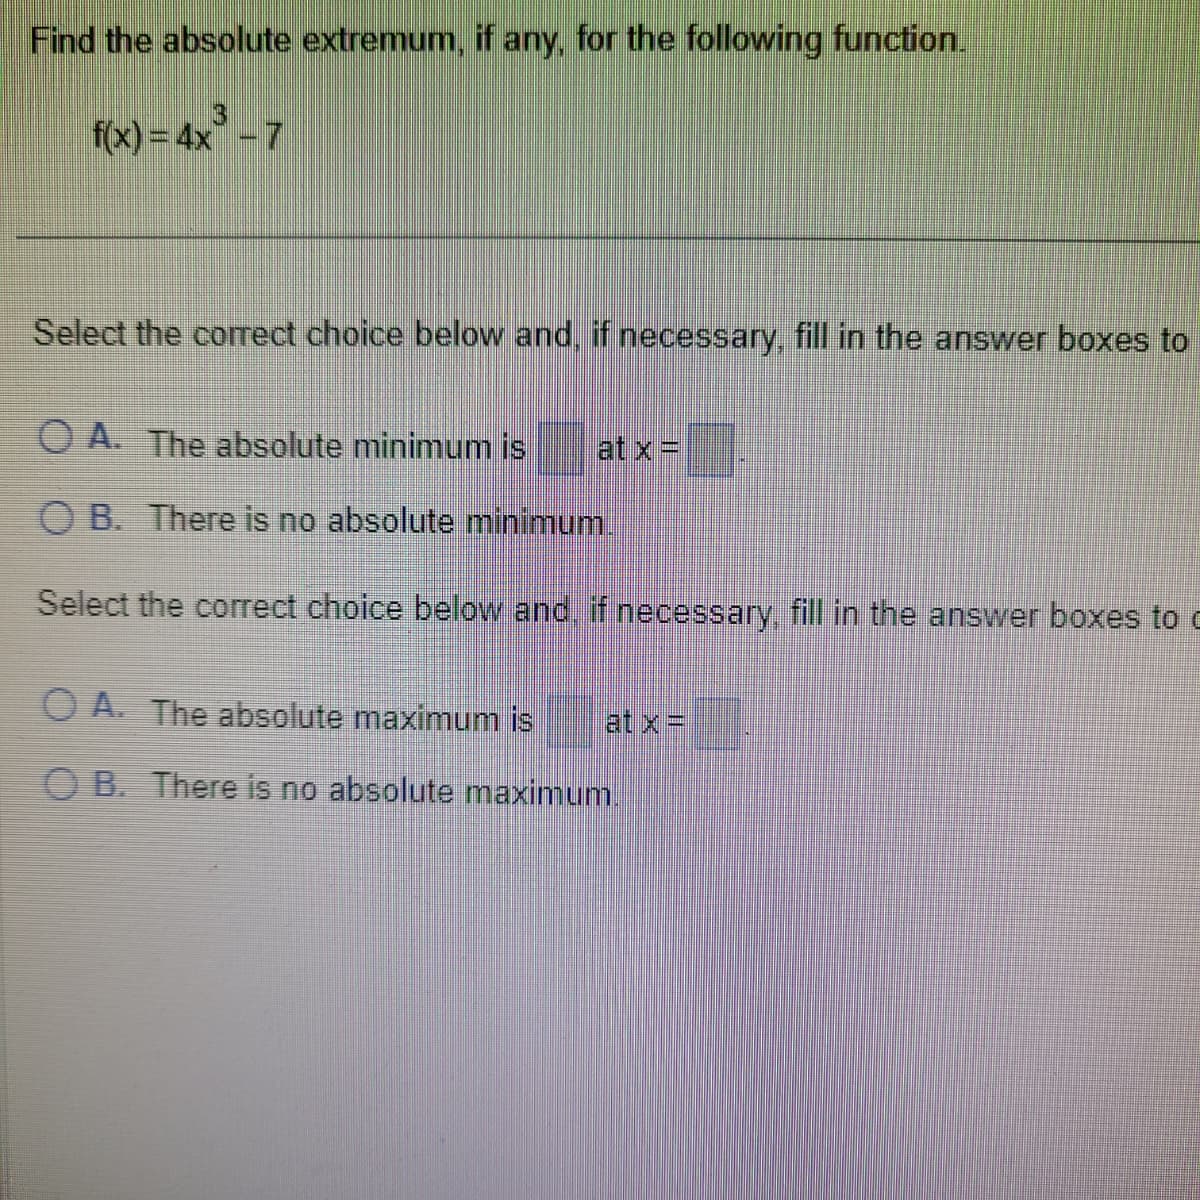 Find the absolute extremum, if any, for the following function.
f(x) = 4x - 7
Select the correct choice below and, if necessary, fill in the answer boxes to
O A. The absolute minimum is at x =
OB. There is no absolute minimum.
Select the correct choice below and, if necessary, fill in the answer boxes to c
A. The absolute maximum is
OB. There is no absolute maximum.